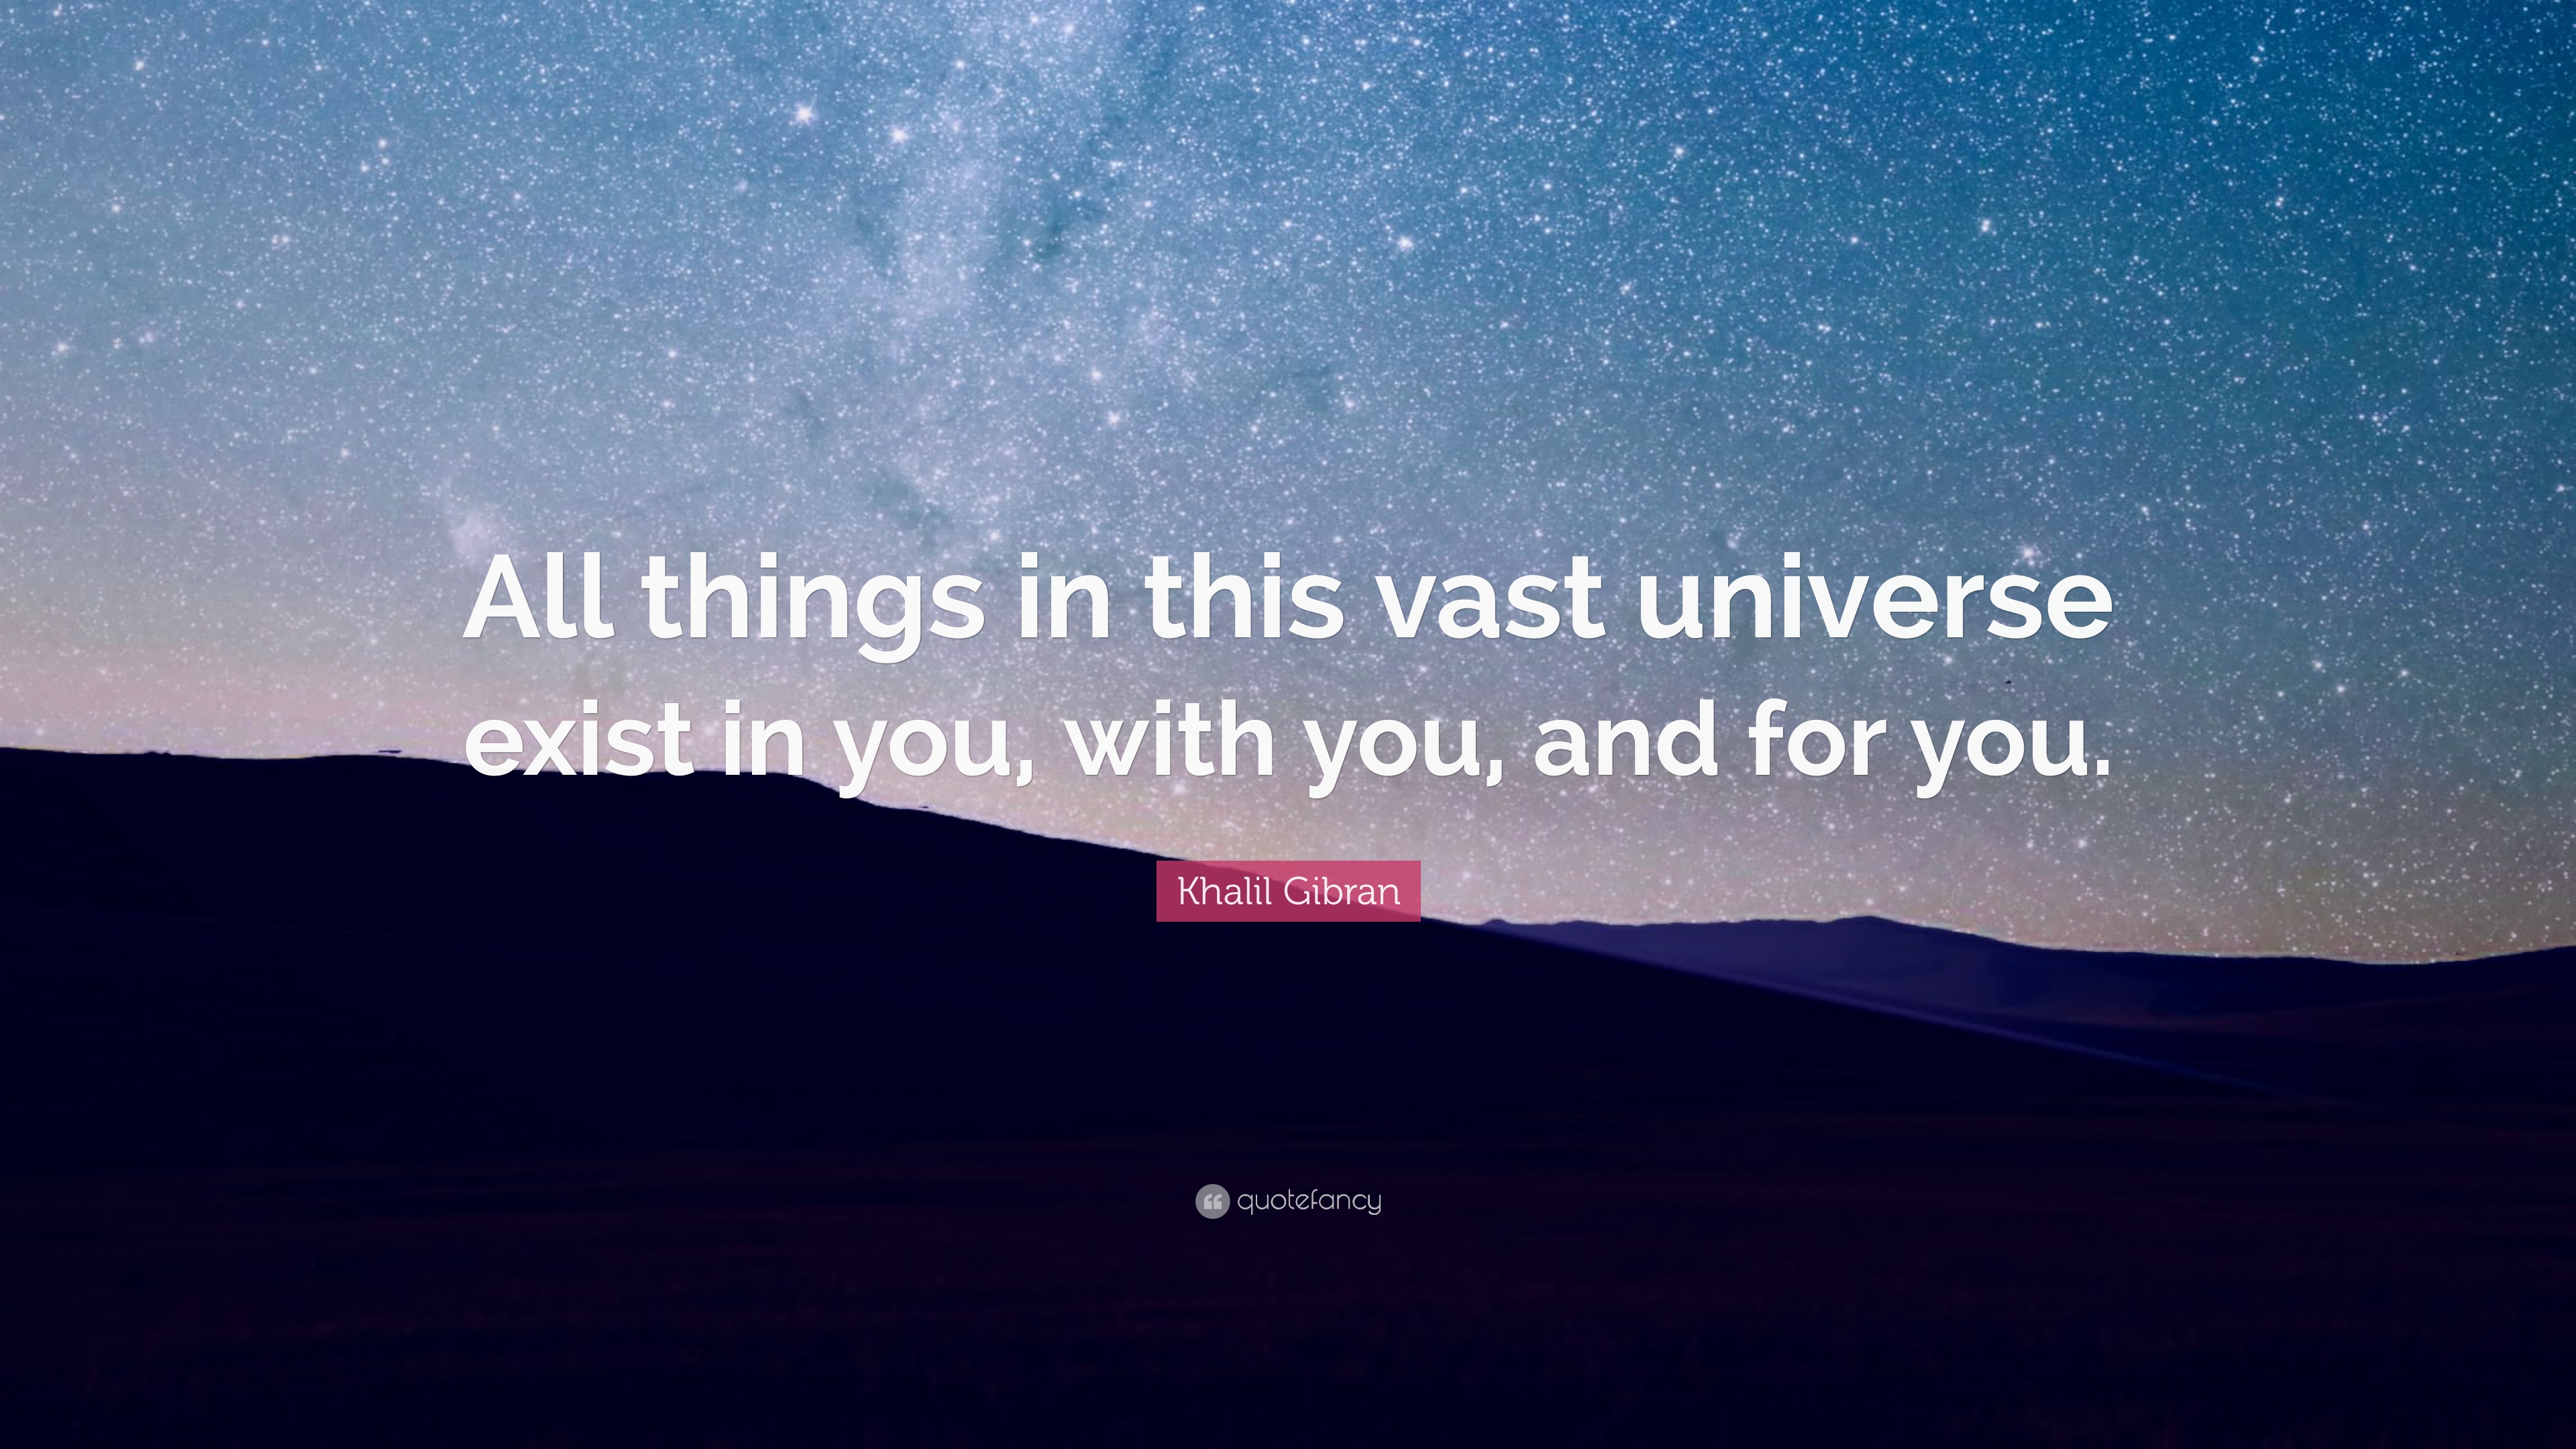 Khalil Gibran Quote: “All things in this vast universe exist in you ...